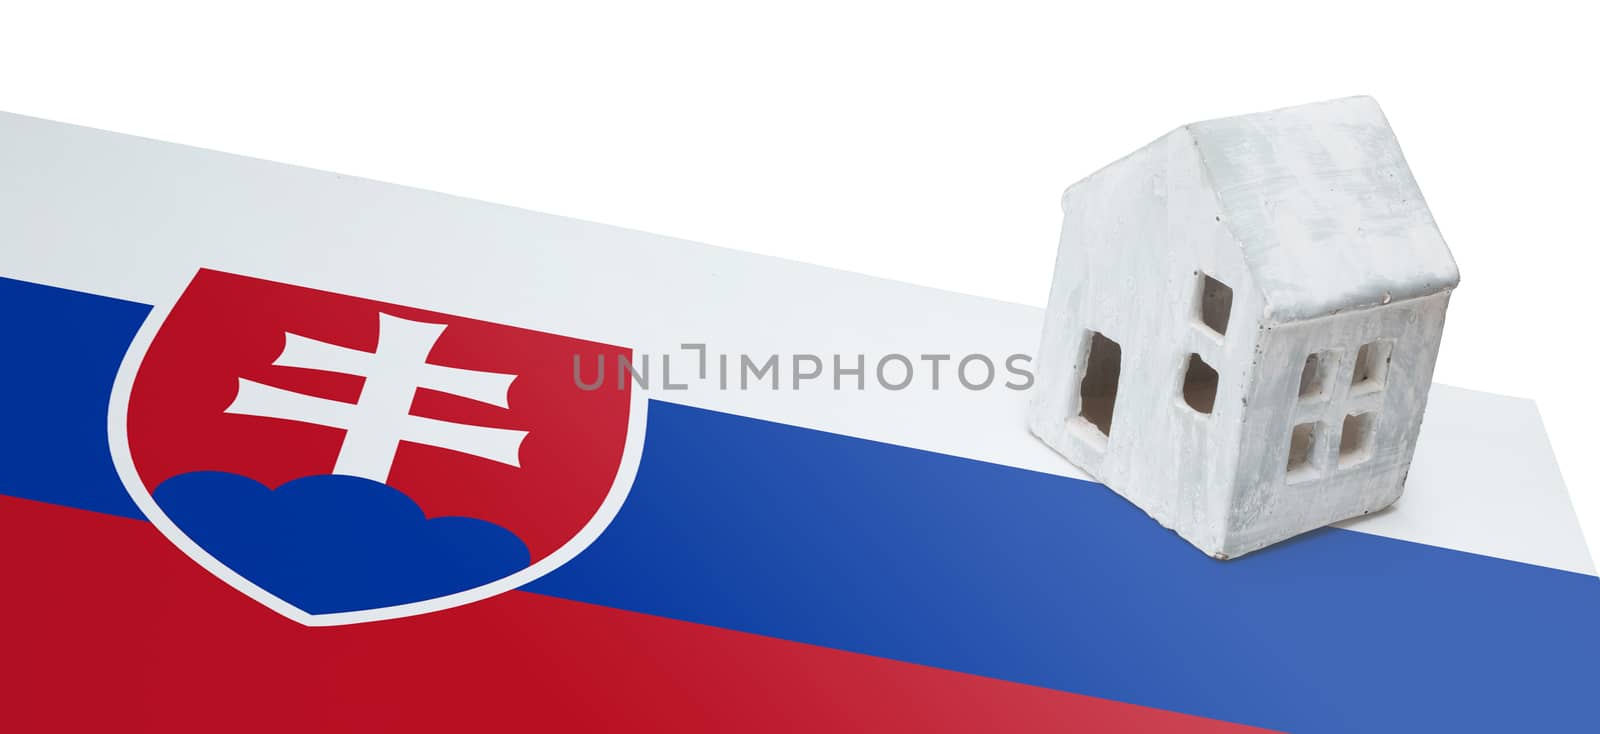 Small house on a flag - Living or migrating to Slovakia